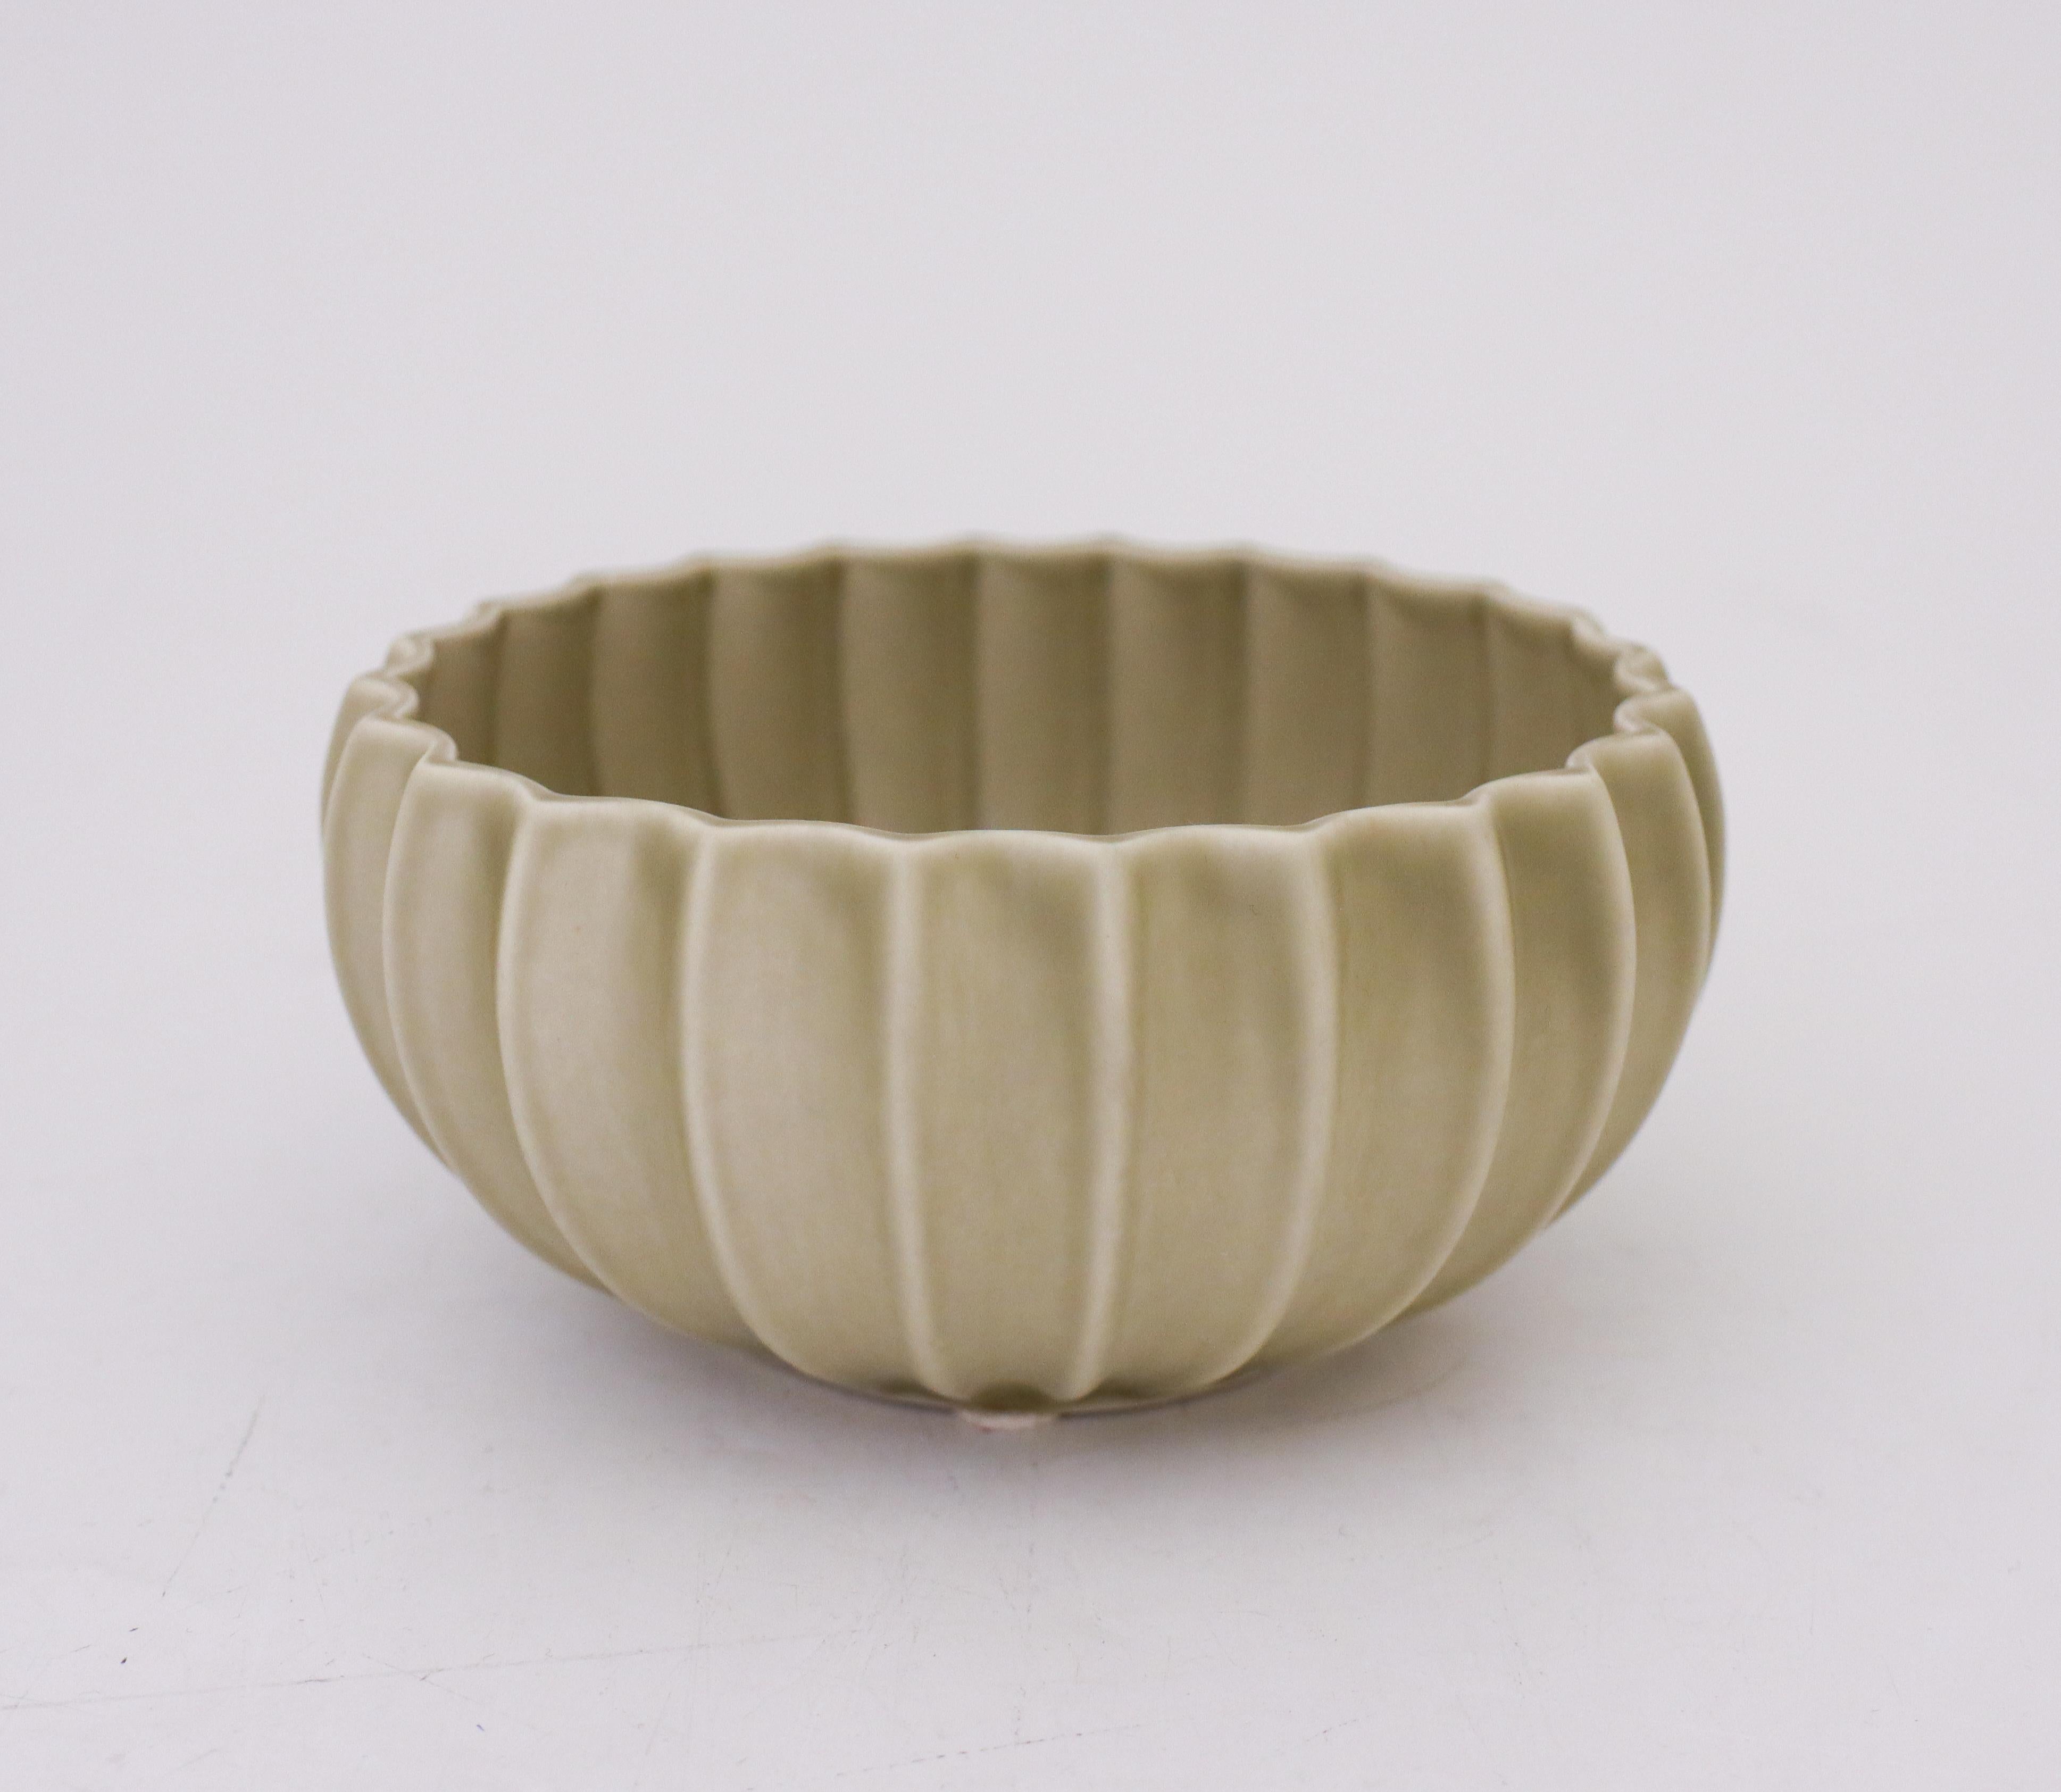 A olive-green/grey bowl designed by Pia Rönndahl at Rörstrand in the 1980s. The bowl is 7 cm (2.8